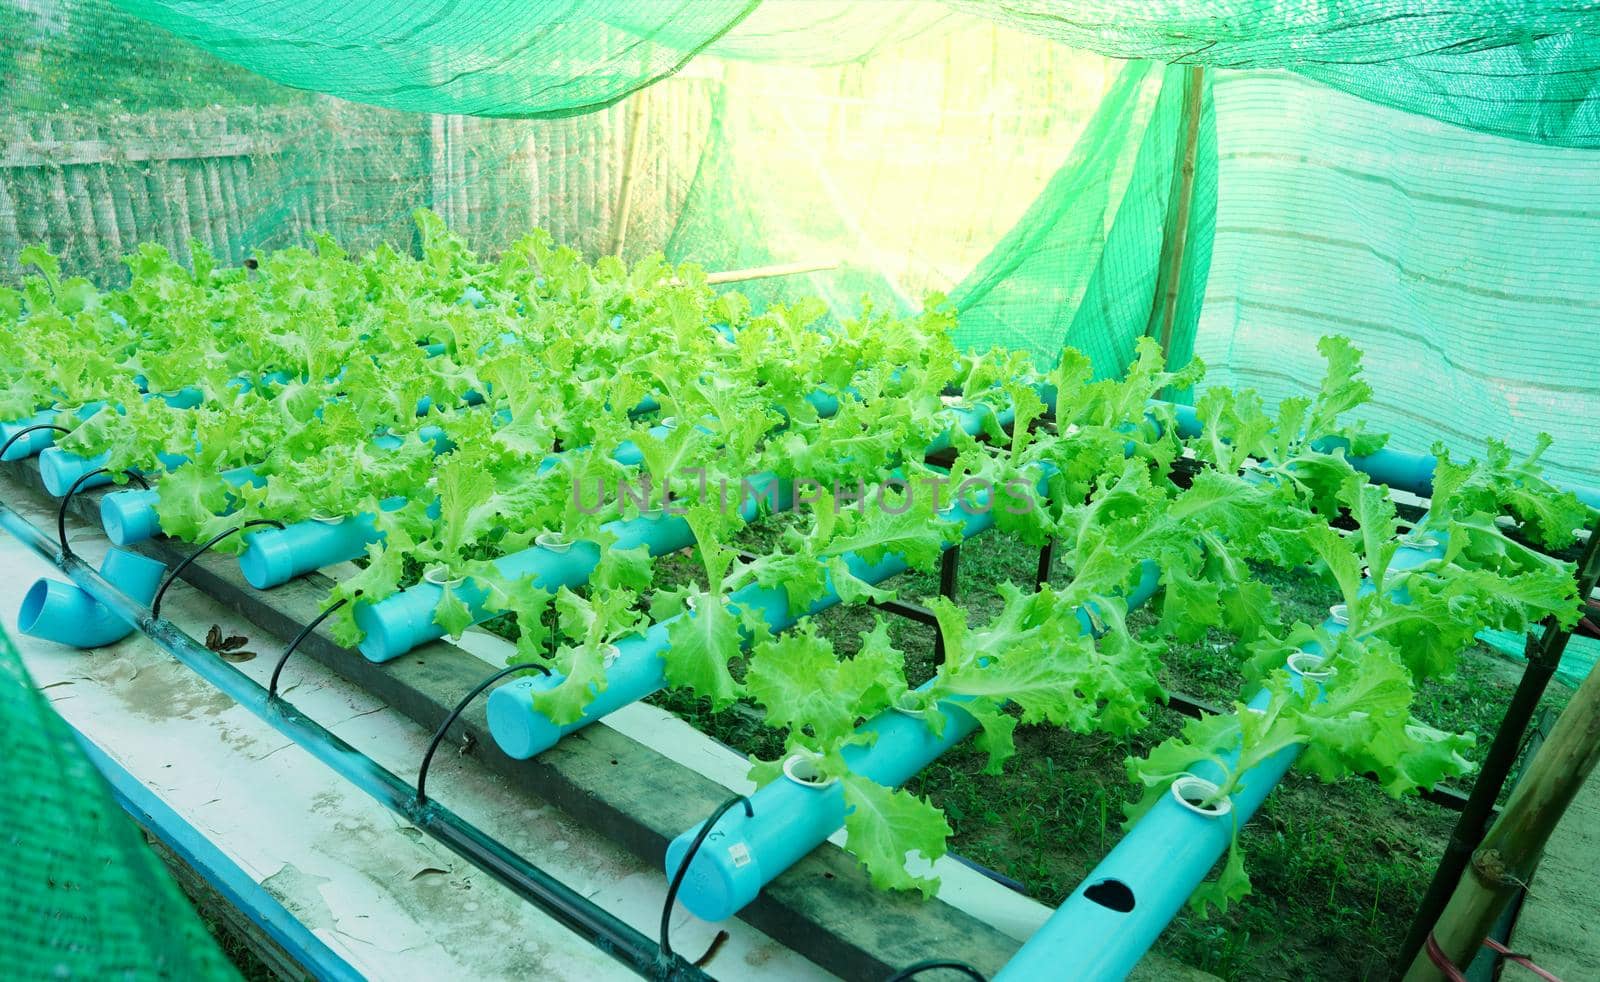 Fresh green organic salad greens are grown using water pipes or hydroponic farming.